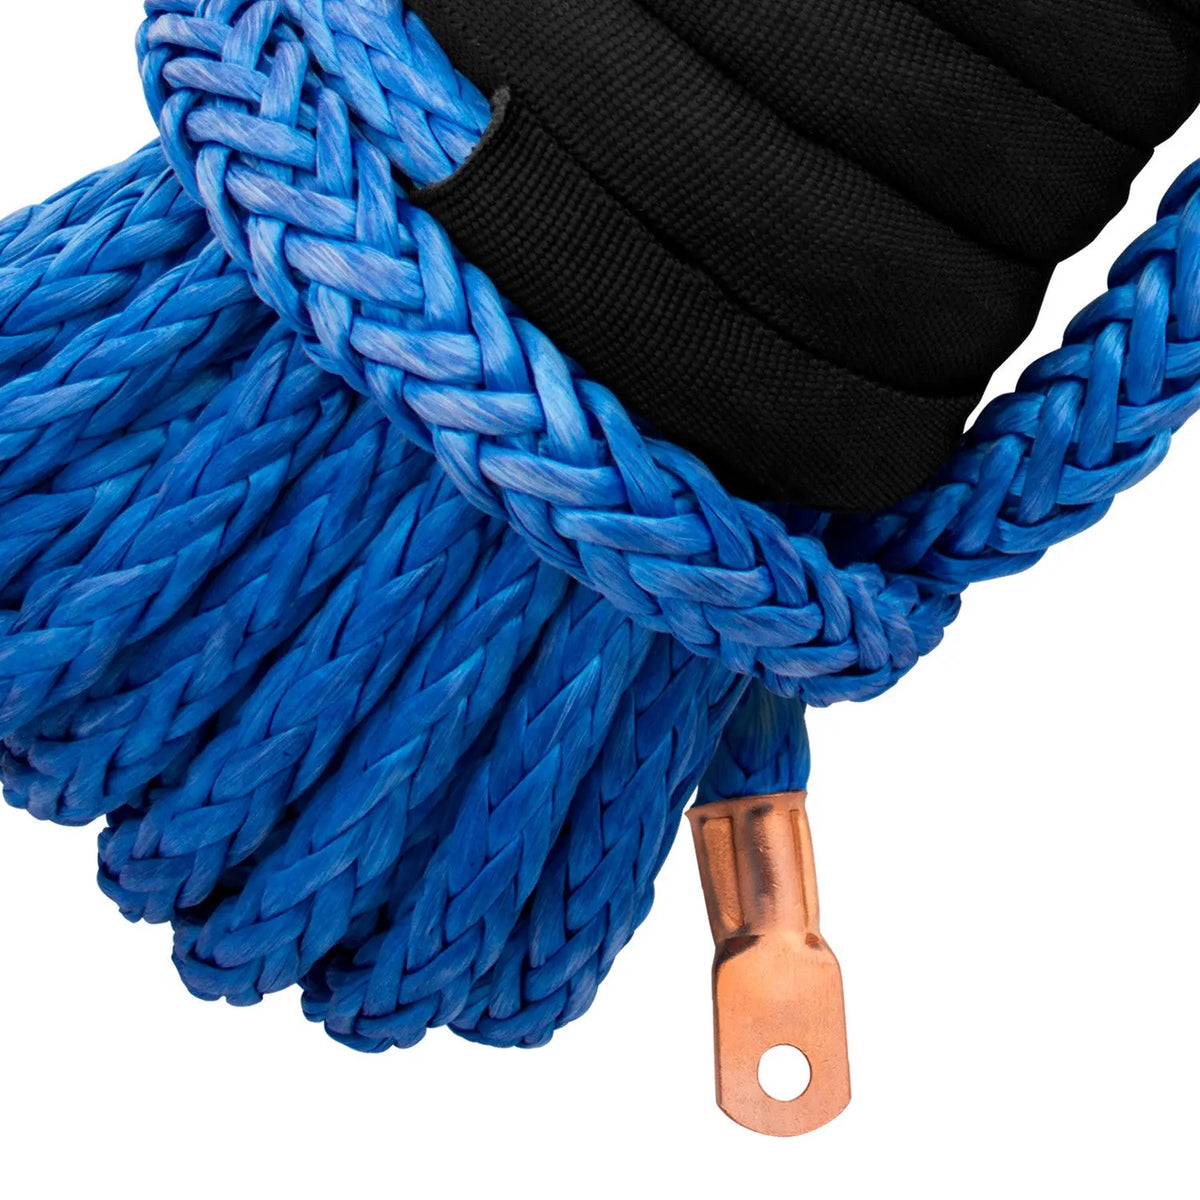 7/16" Diamond Line Winch Rope Mainline - Crimped End for Winch Attachment.